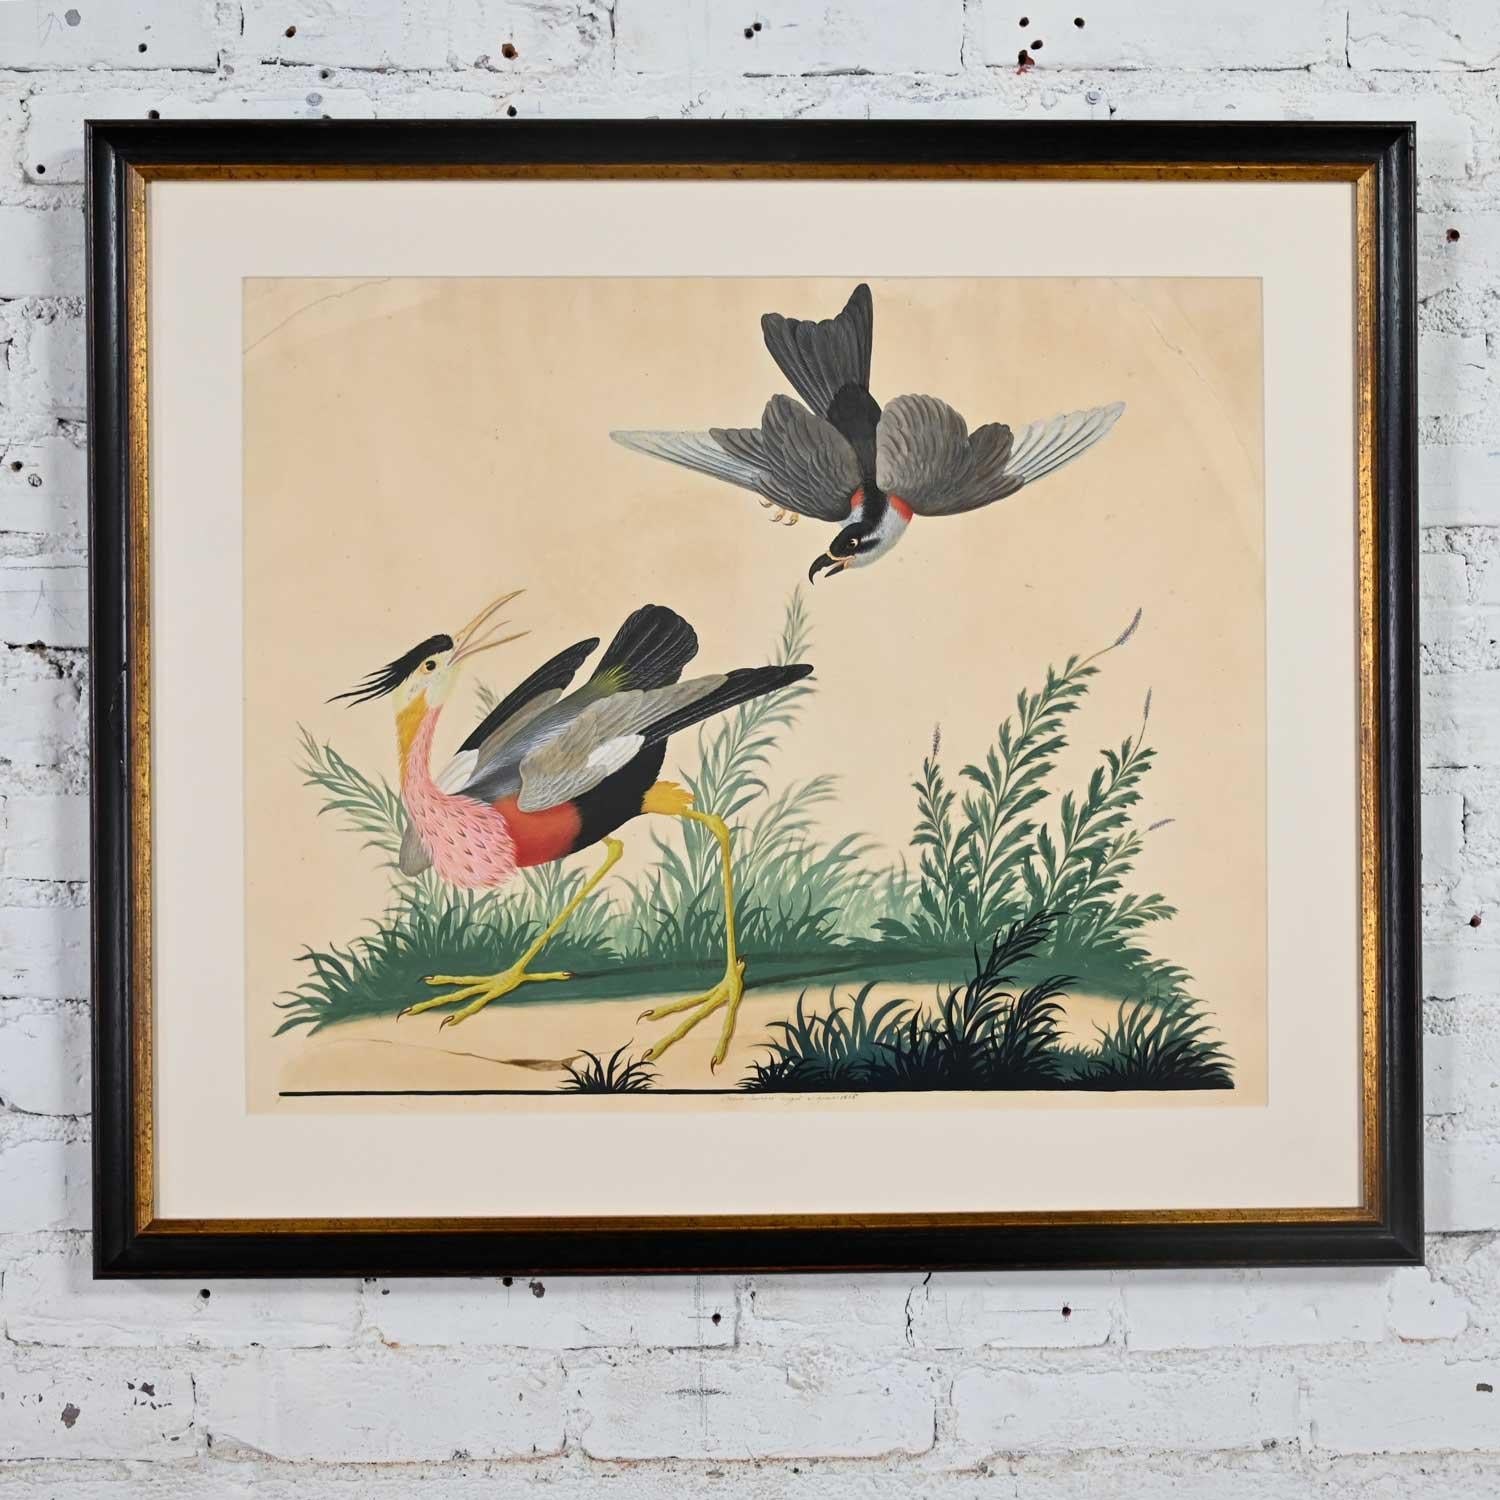 Wonderful vintage authentic signed hand finished watercolor painting of exotic birds by Vittorio Raineri. Professionally framed in a black museum glass frame with UV protection and gold trim. Beautiful condition, keeping in mind that this is vintage